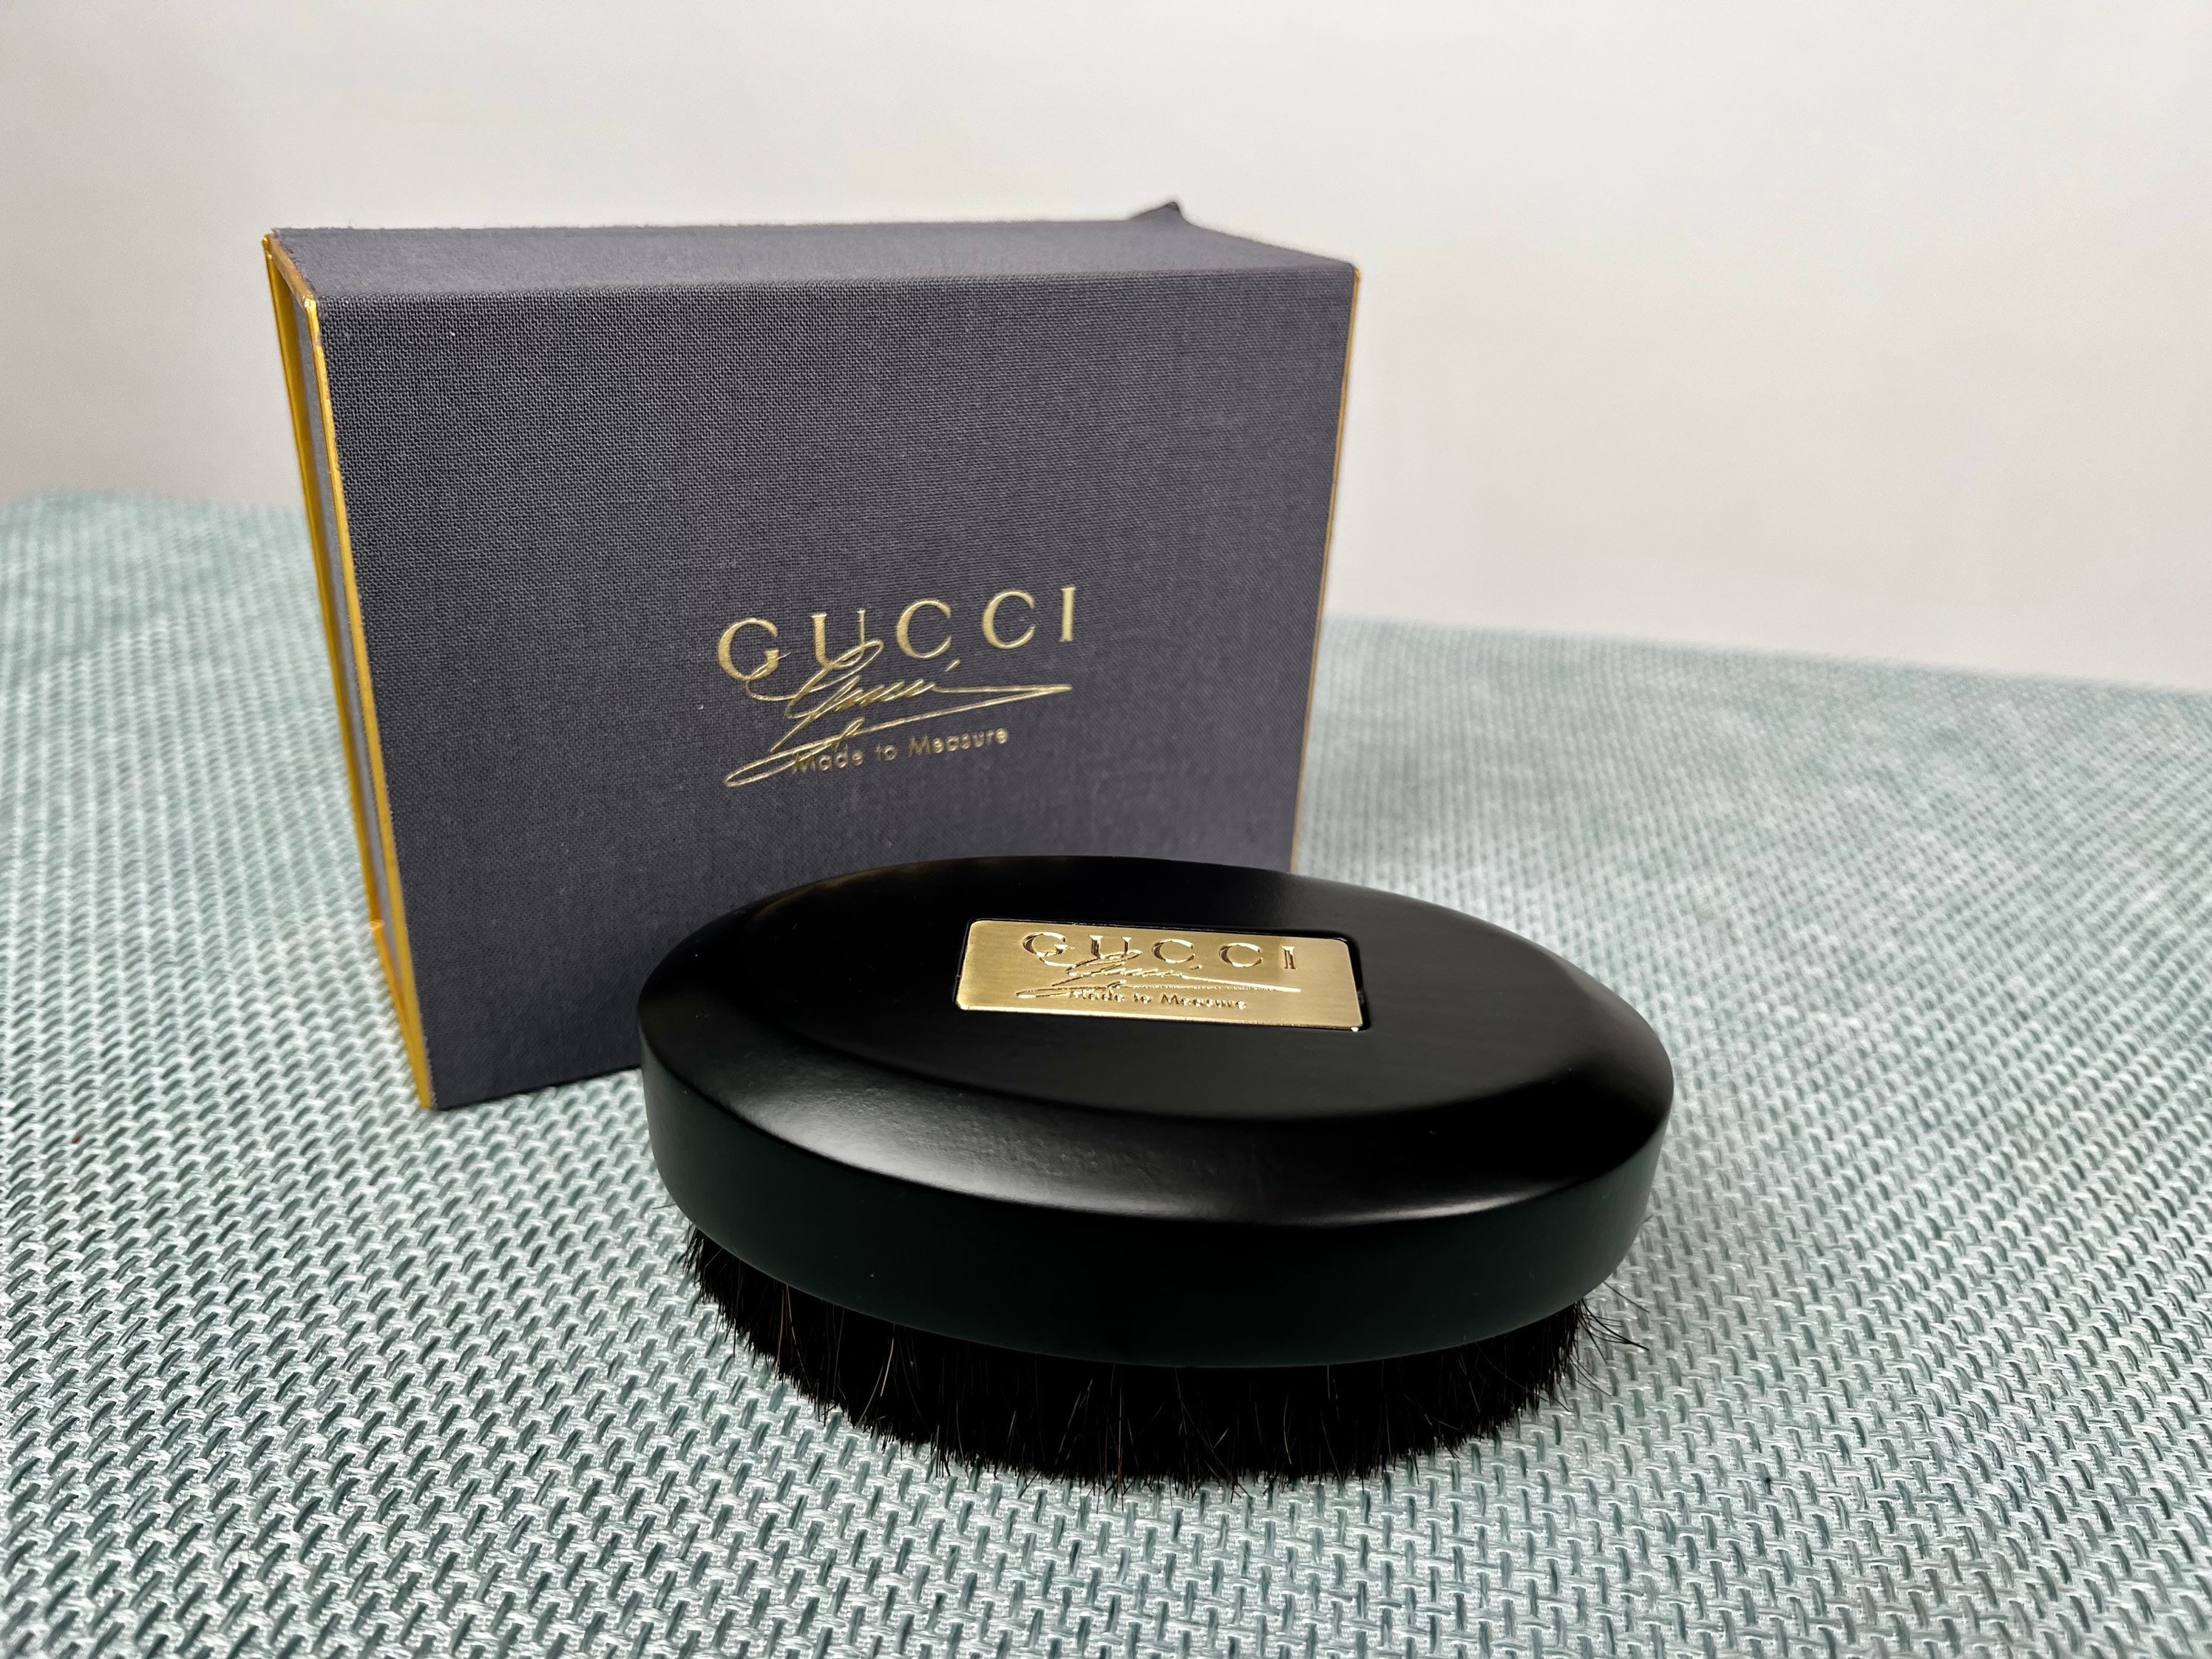 AUTHENTIC LARGE GUCCI EMPTY GIFT BOX with ORIGINAL TISSUES, ENVELOPE and  CARD